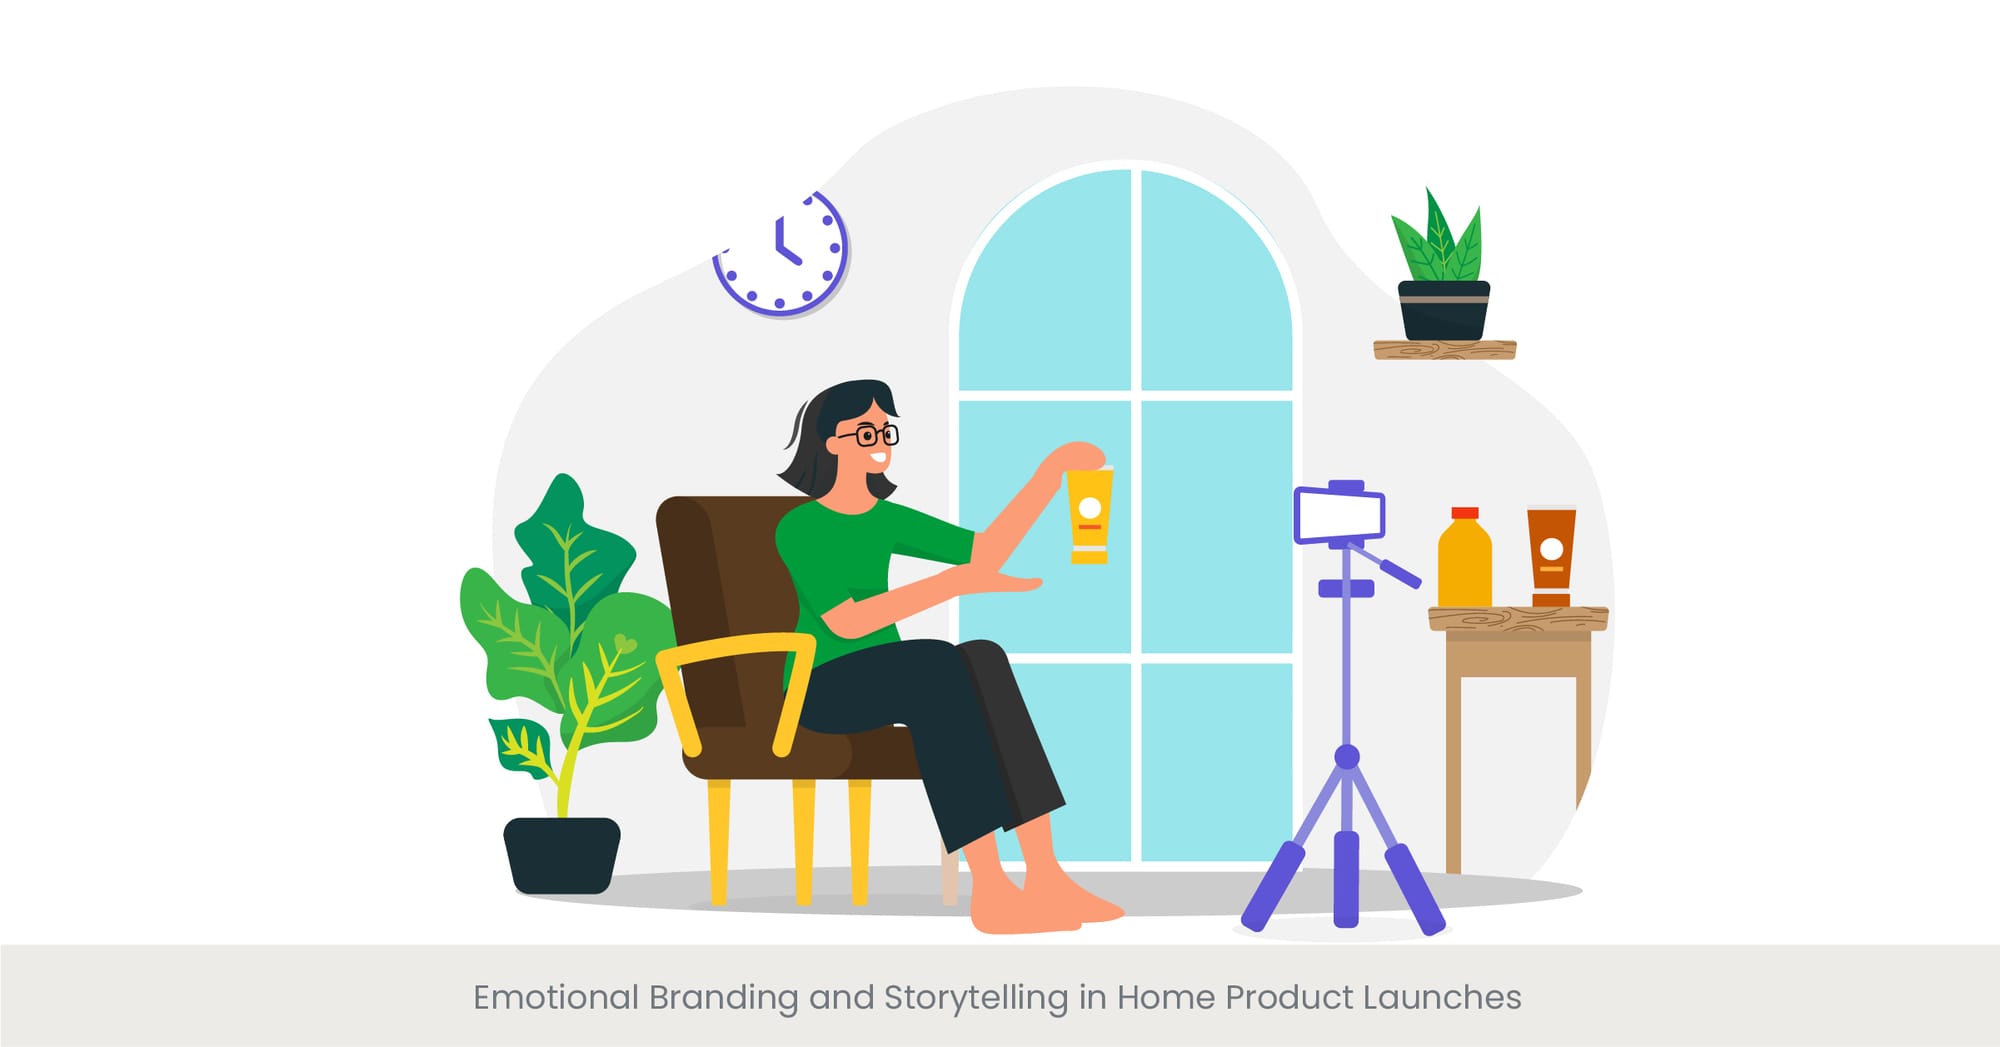 Emotional Branding and Storytelling in Home Product Launches